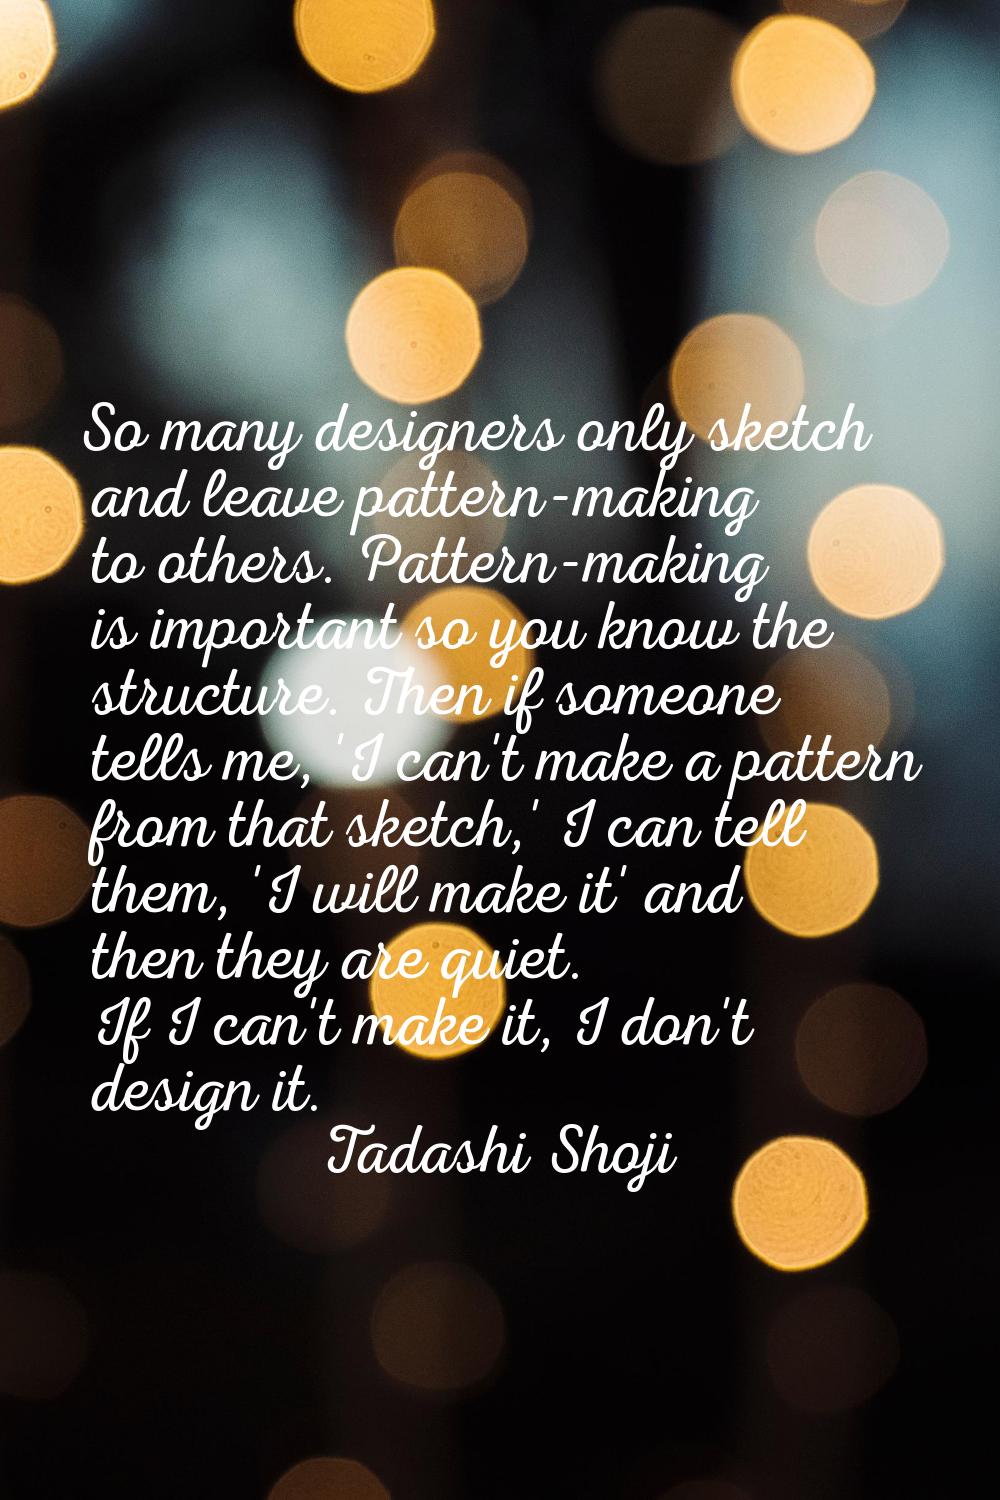 So many designers only sketch and leave pattern-making to others. Pattern-making is important so yo